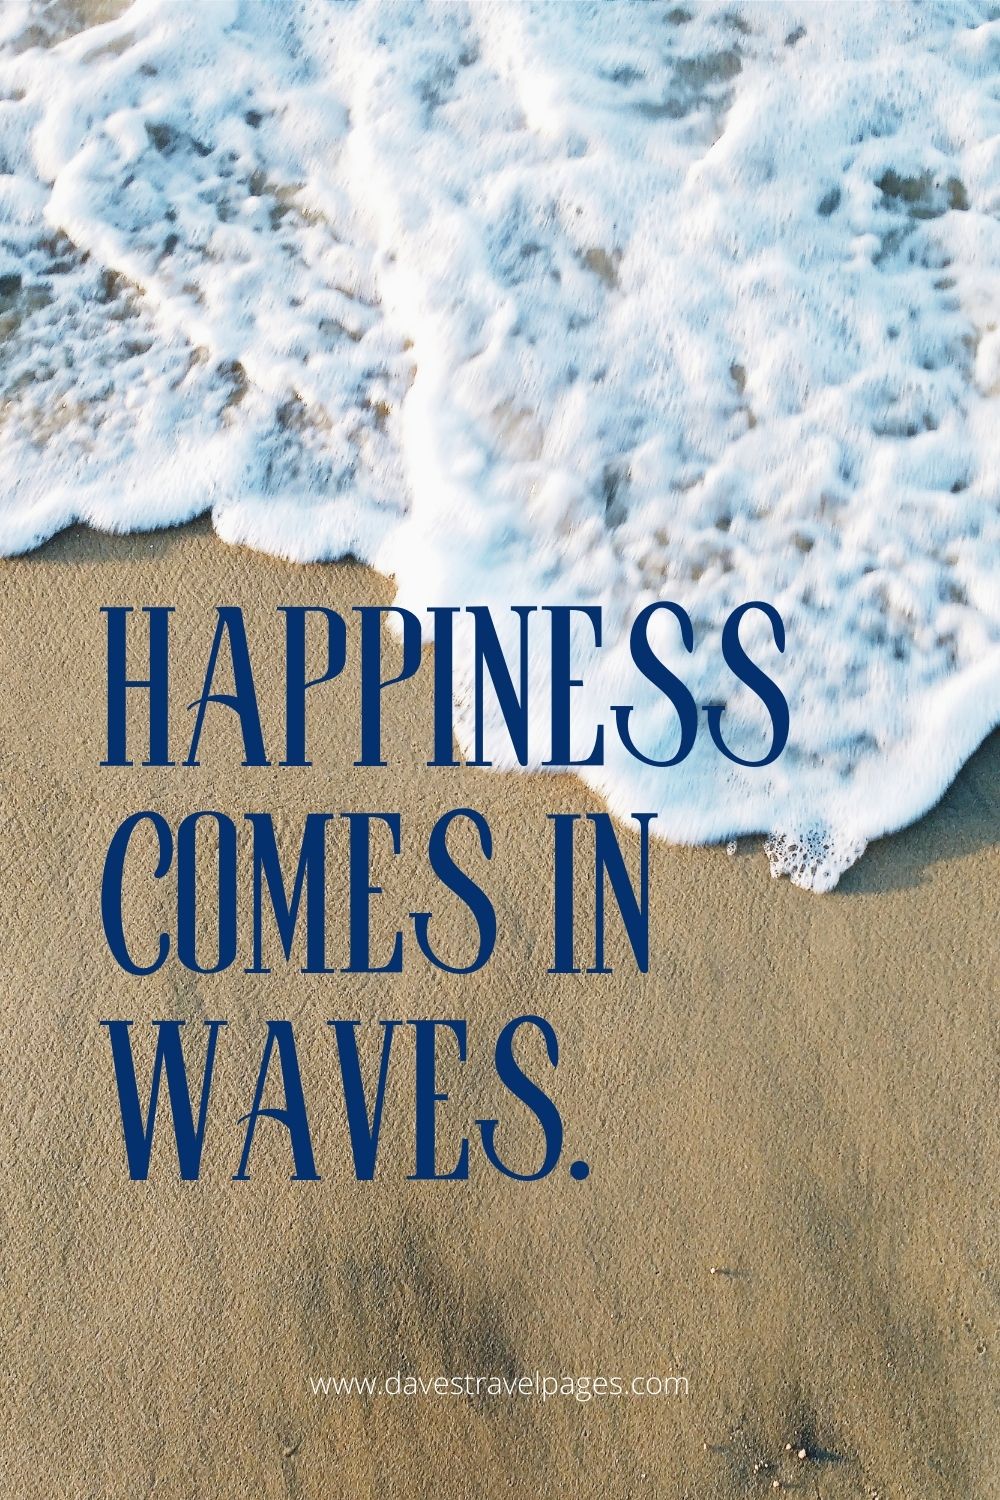 Happiness comes in waves caption about the ocean for instagram